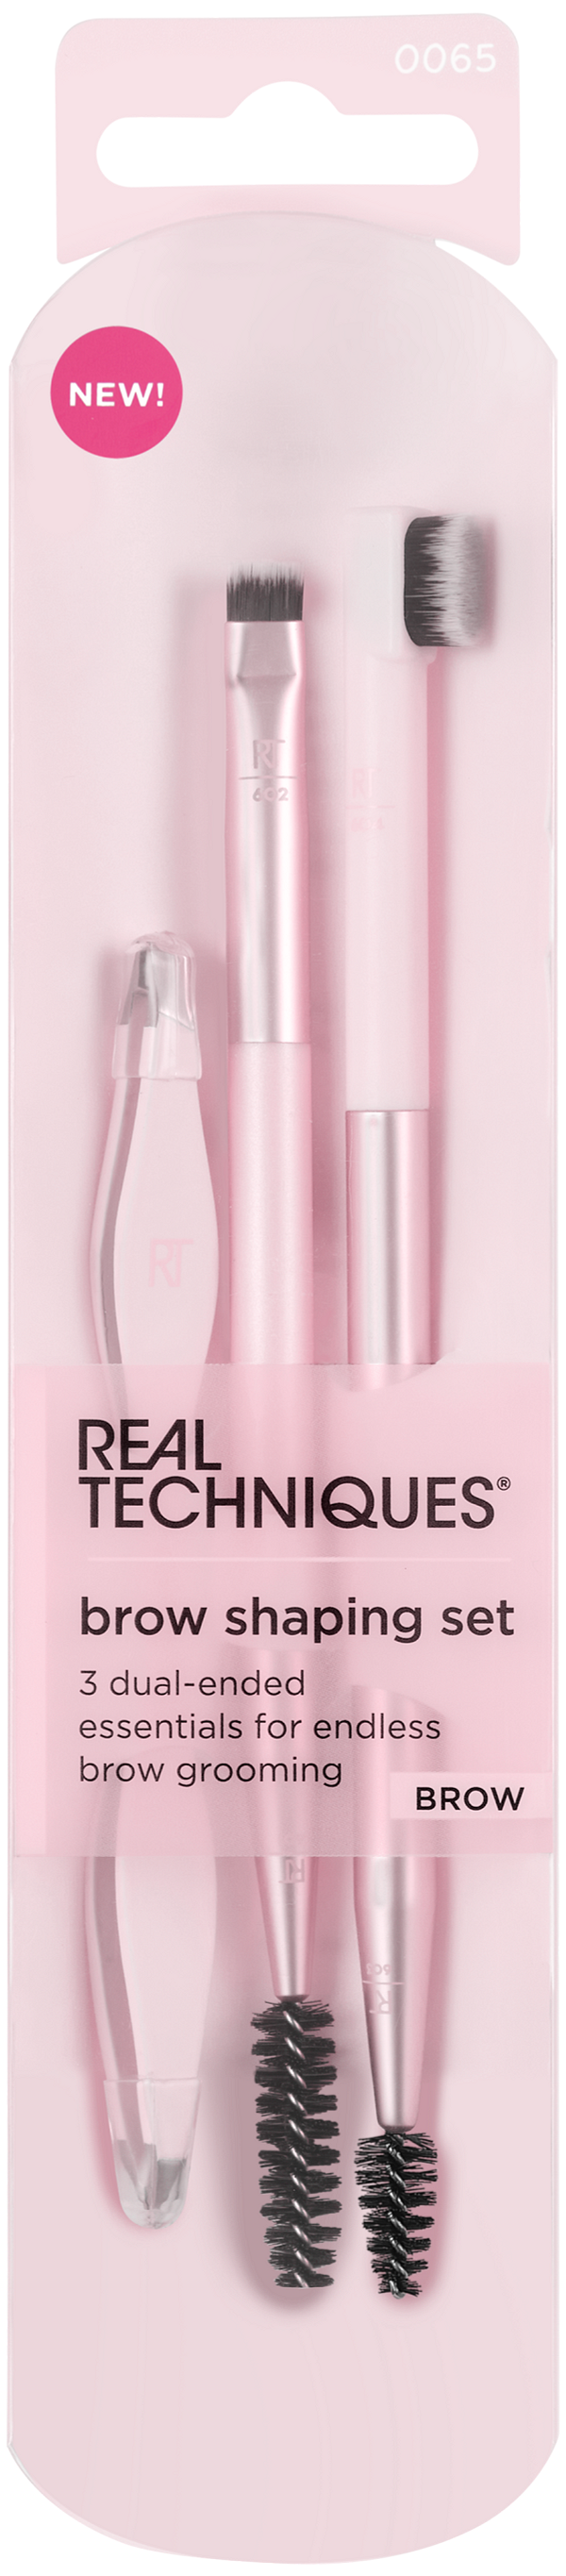 REAL TECHNIQUES BROW SHAPING SET